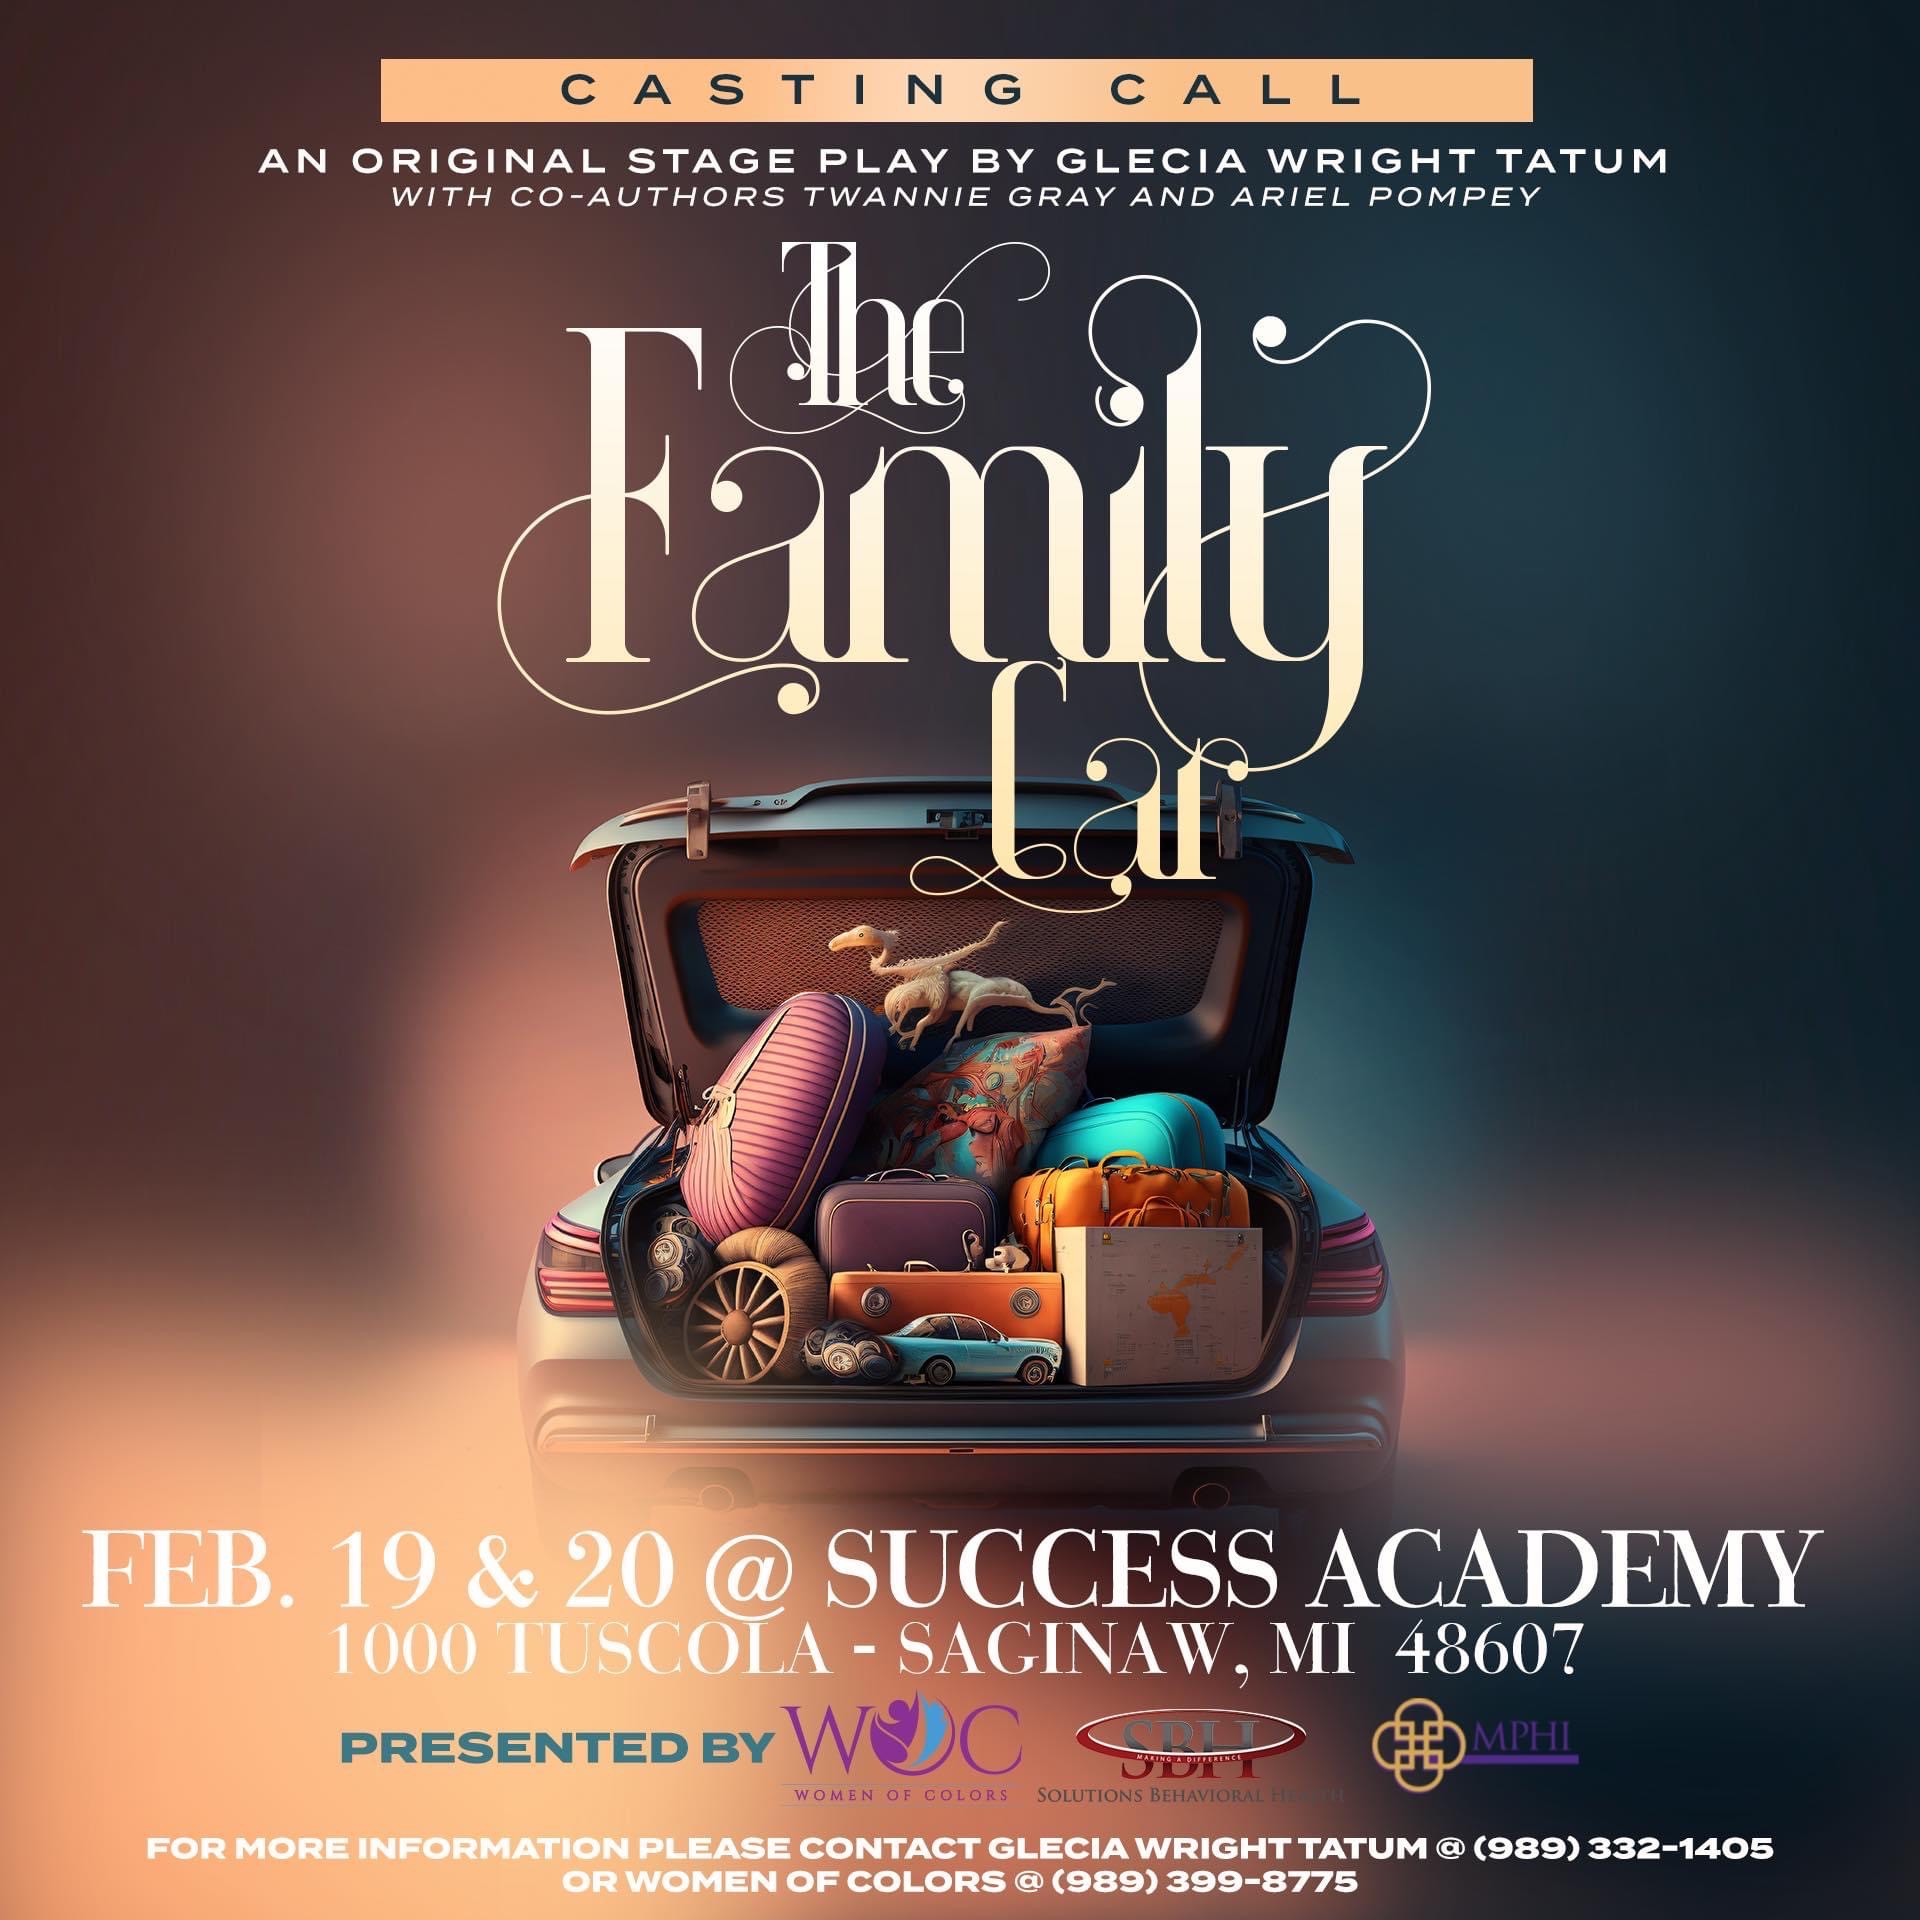 <h1 class="tribe-events-single-event-title">Casting Call for the original stage play “The Family Car”</h1>